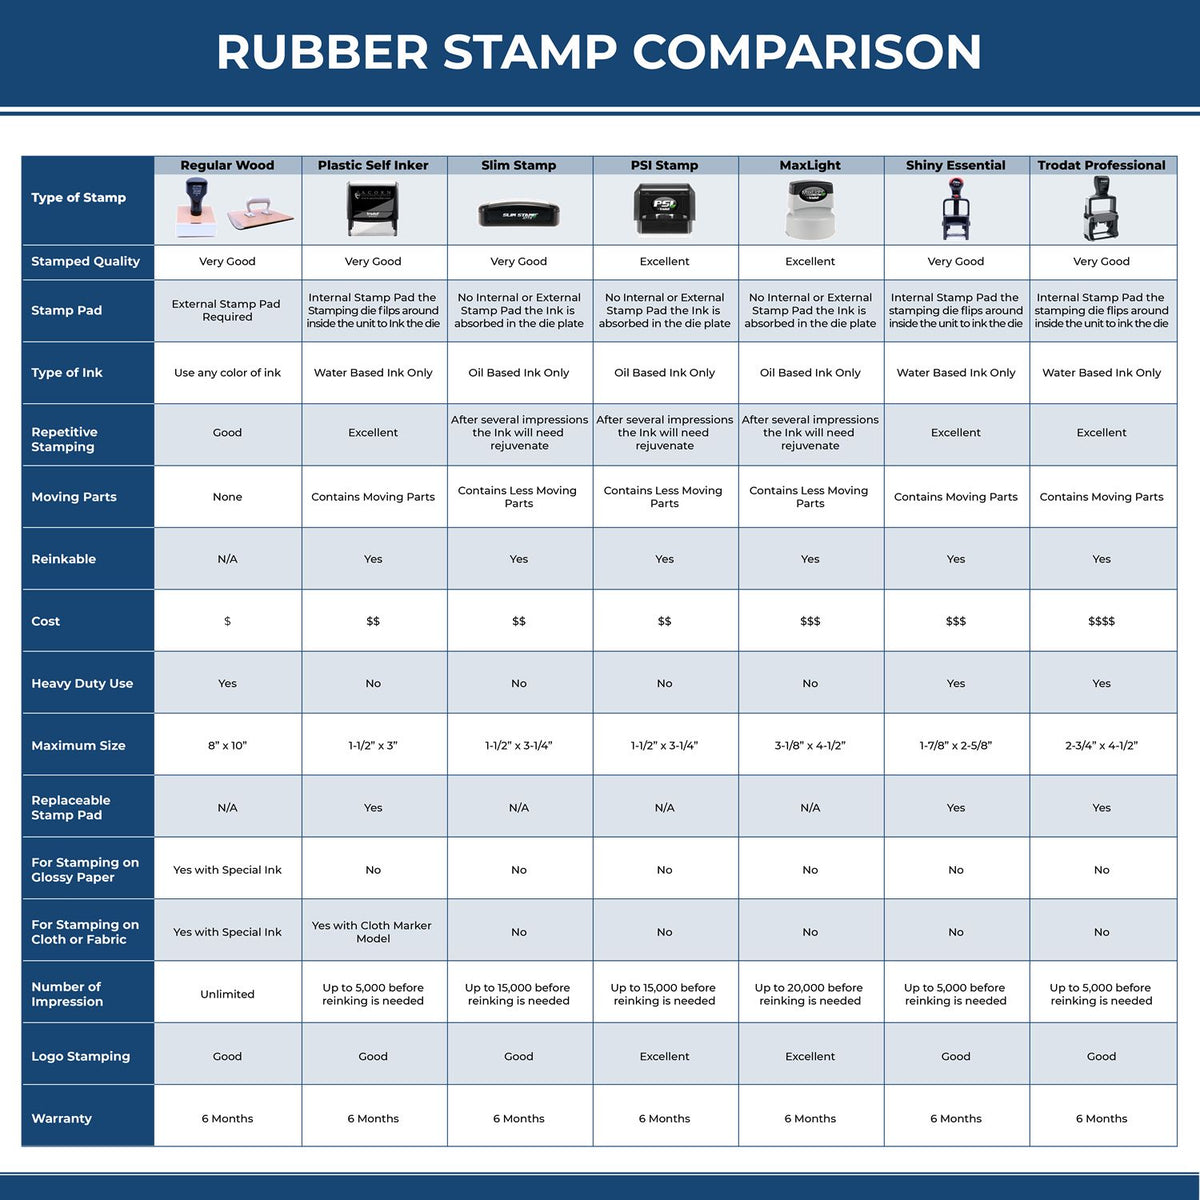 Contact Tracing Rubber Stamp 4475R Rubber Stamp Comparison